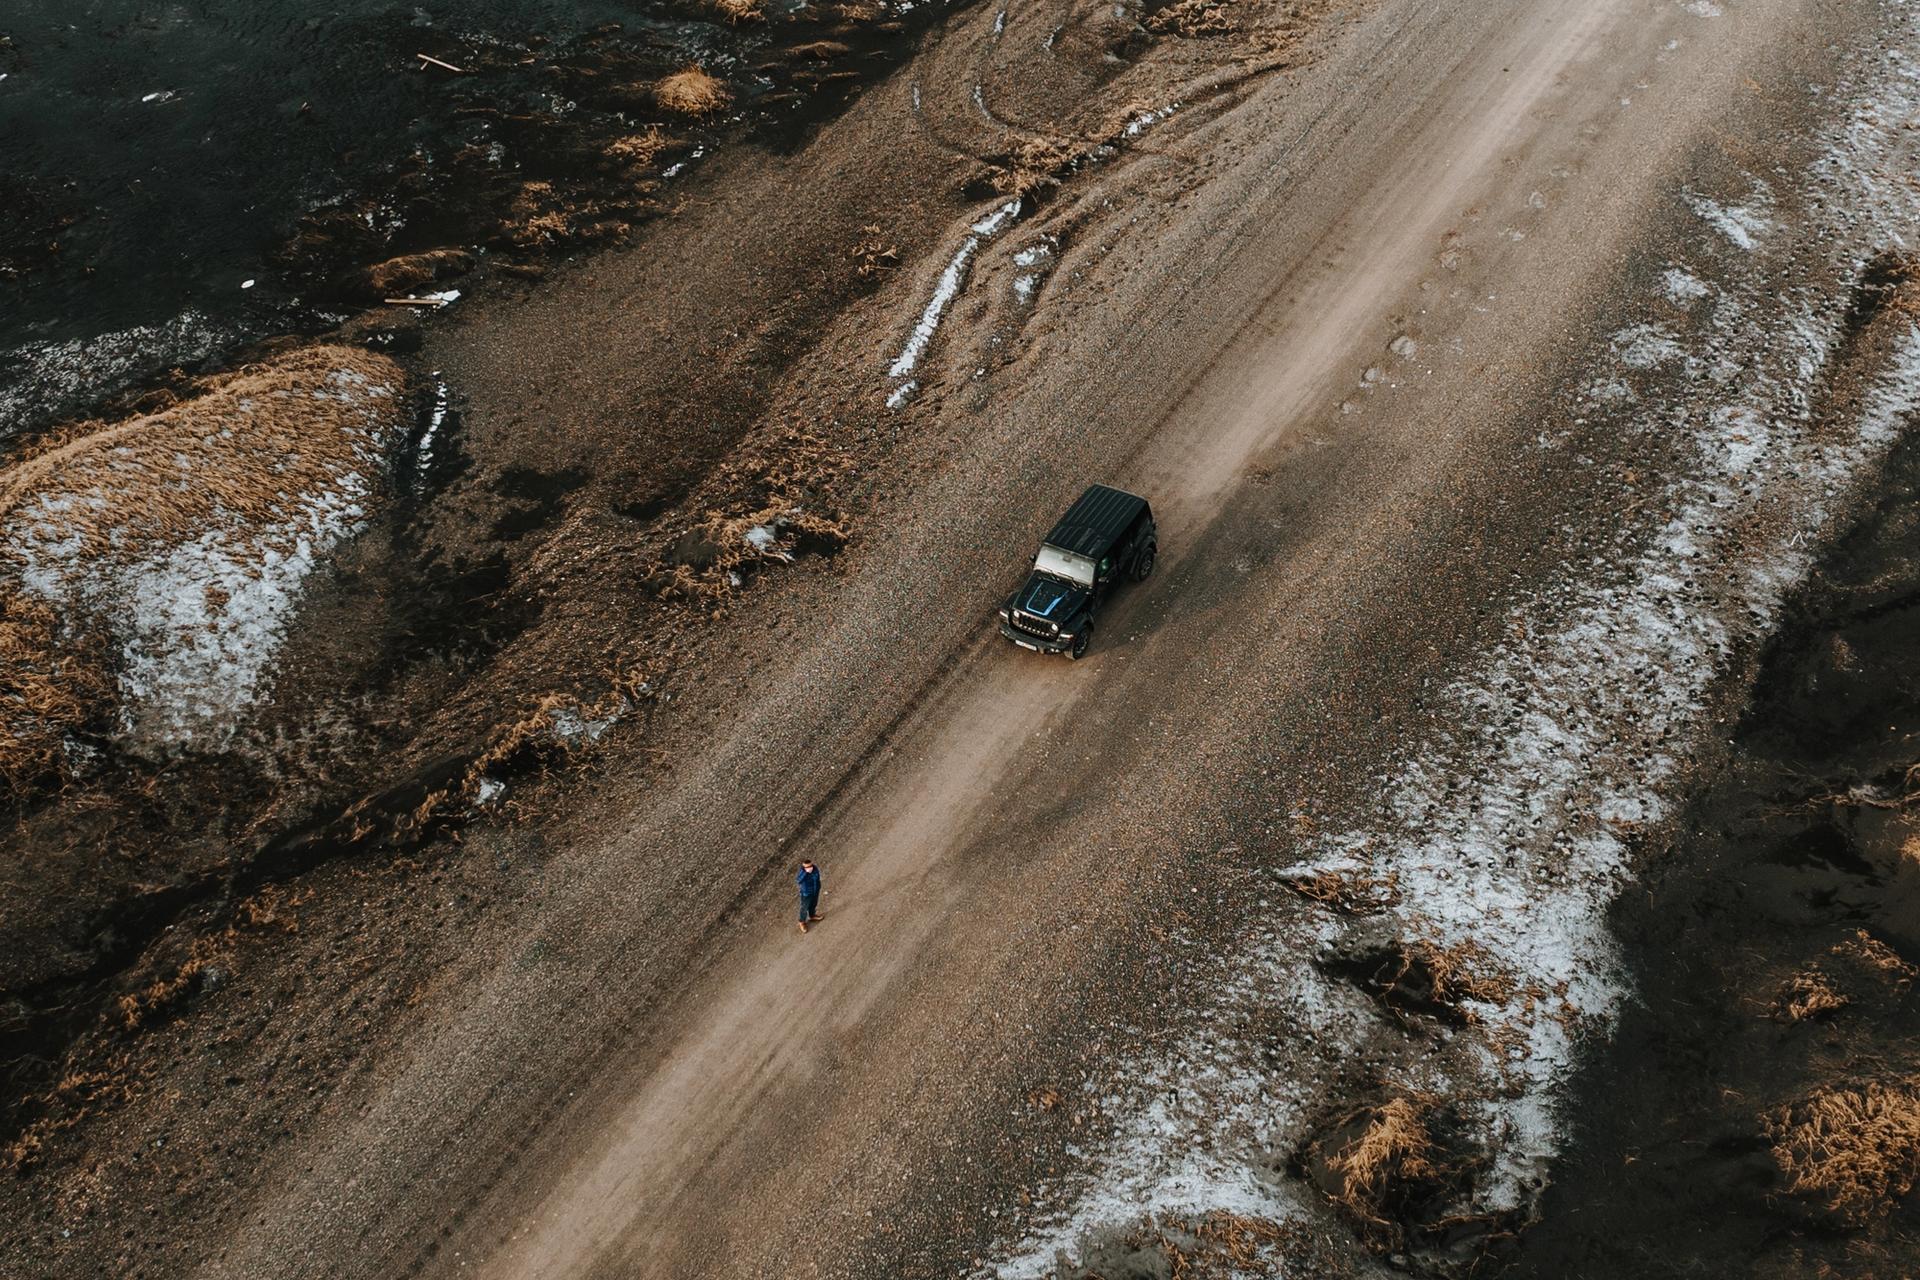 Areal view of an Icelandic F-road 